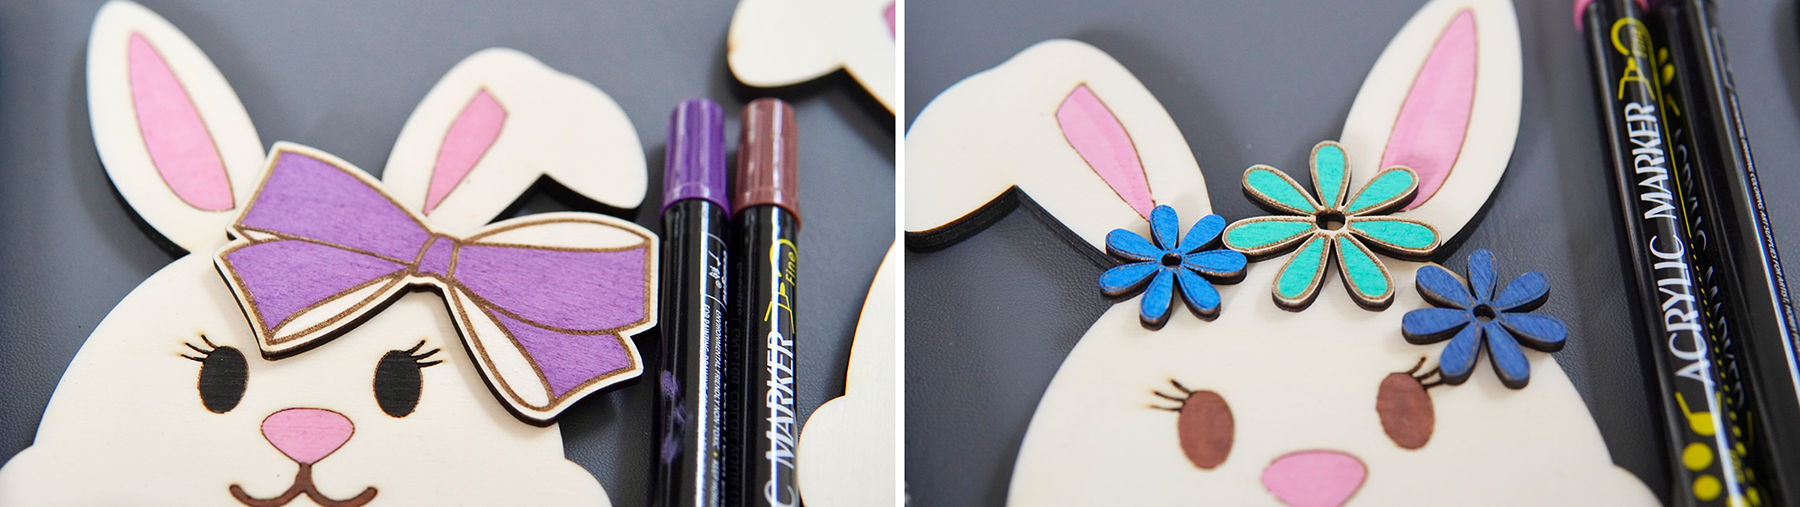 Wooden Easter decorations